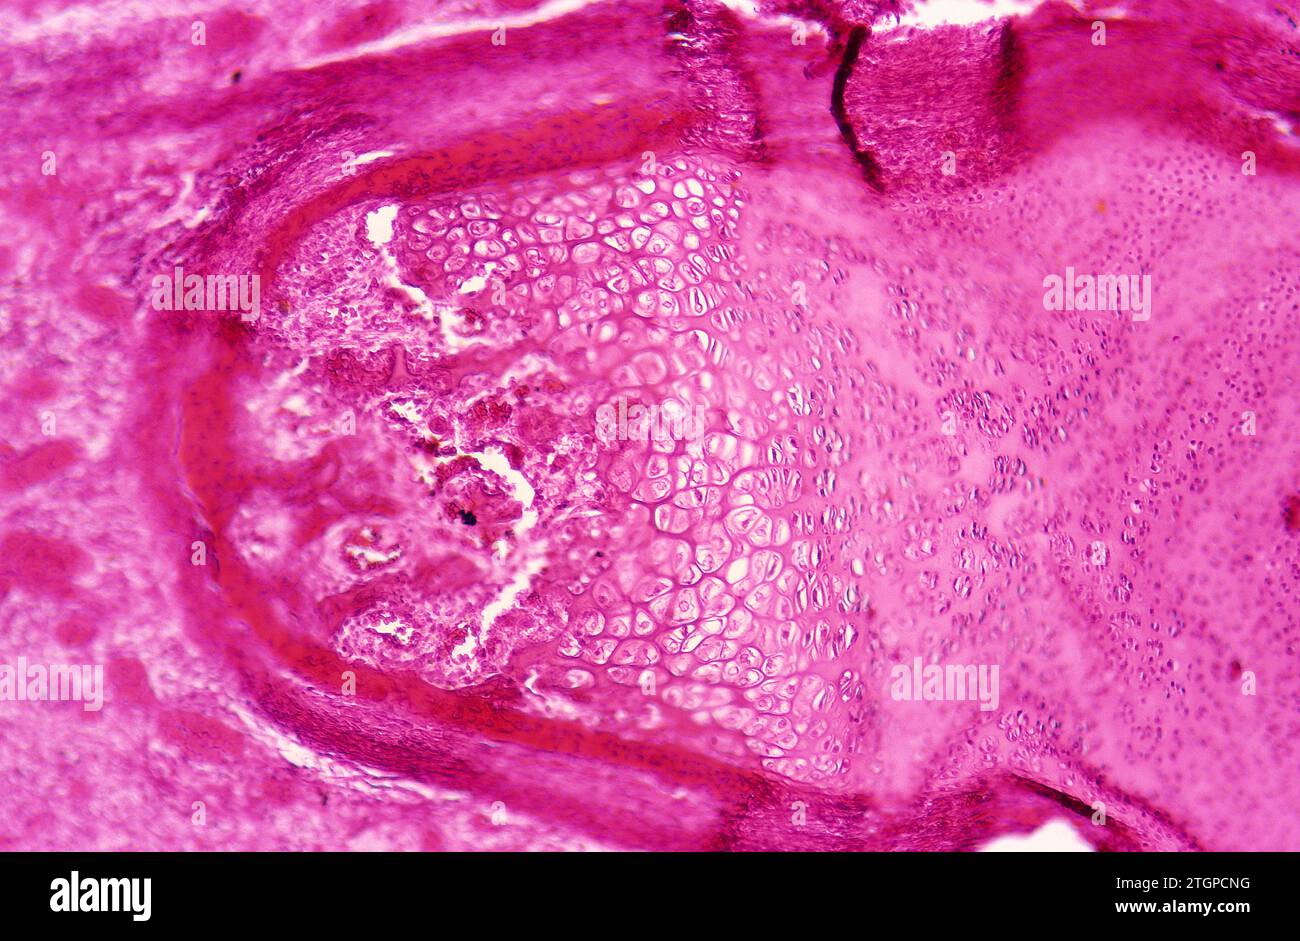 Cartilage in fetal finger. Photomicrograph. Stock Photo